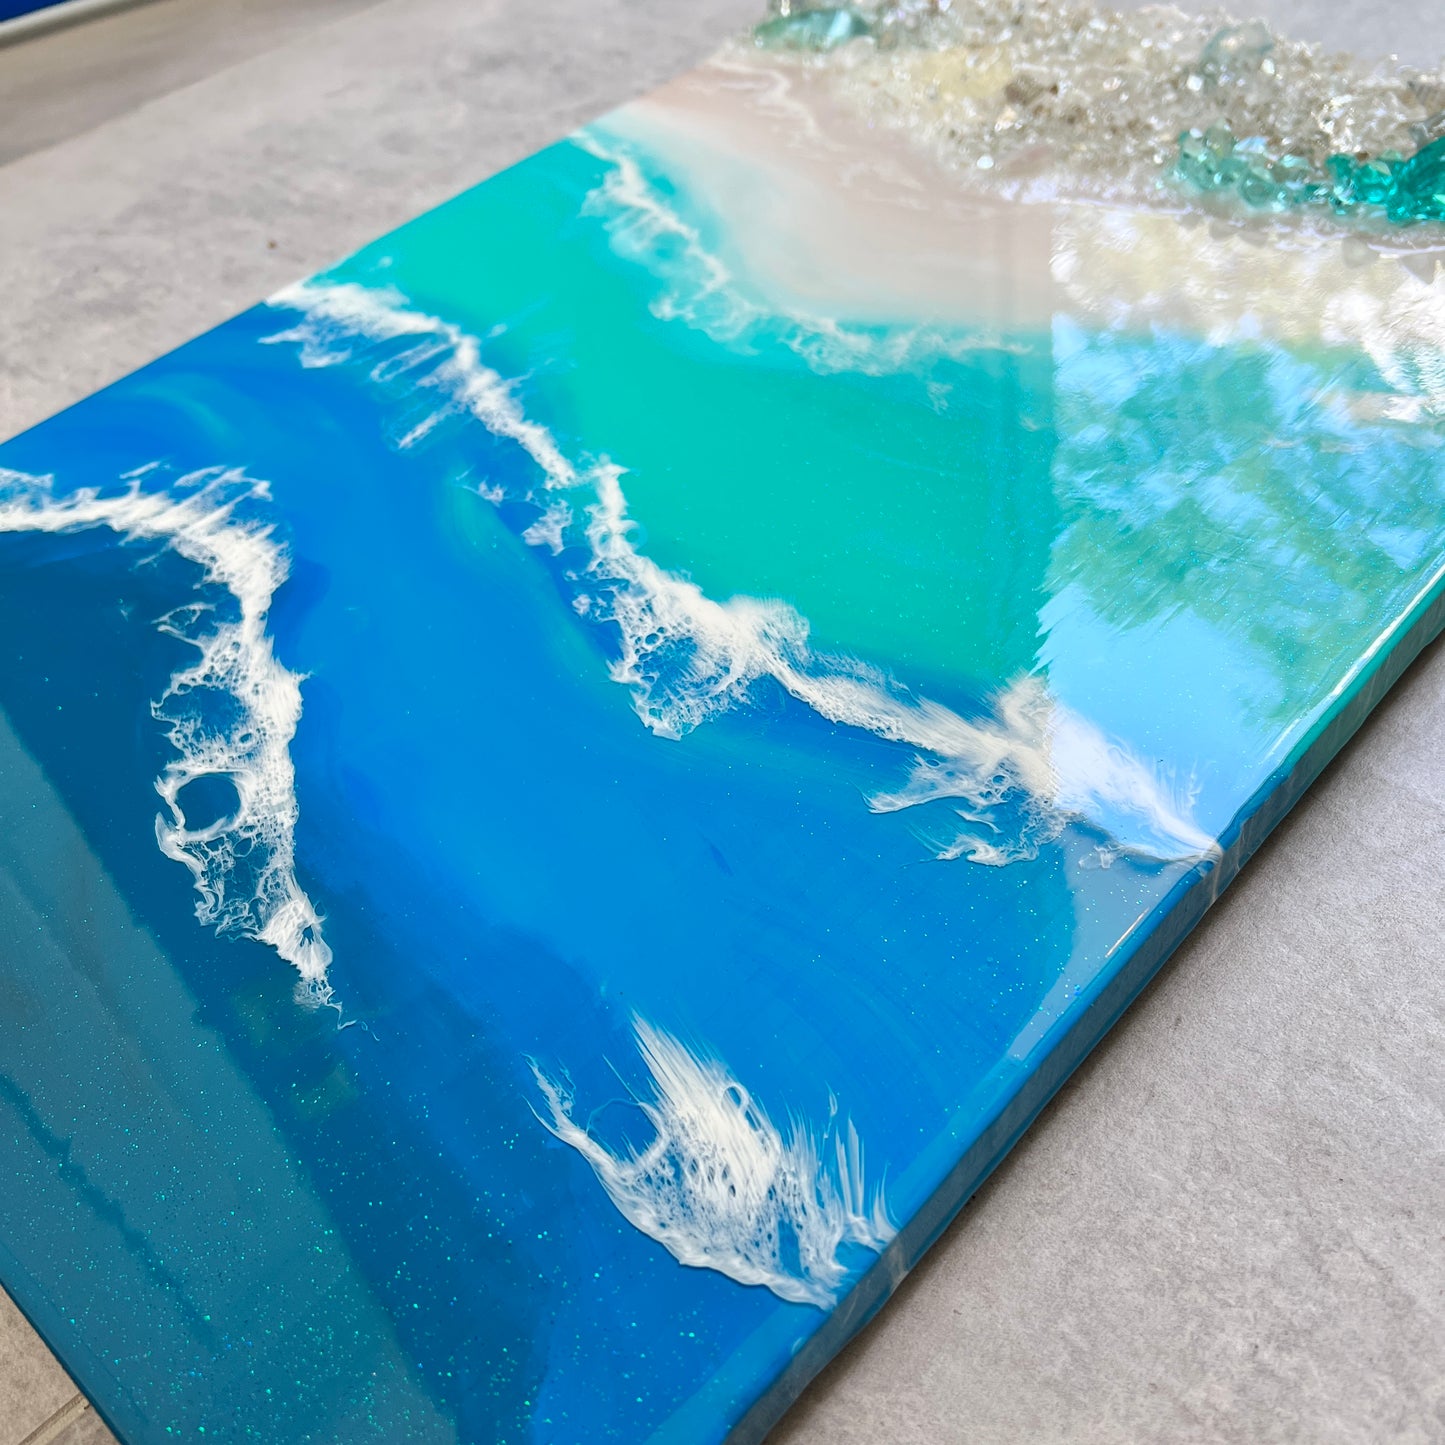 Luxury Beach art with glass and resin crystals